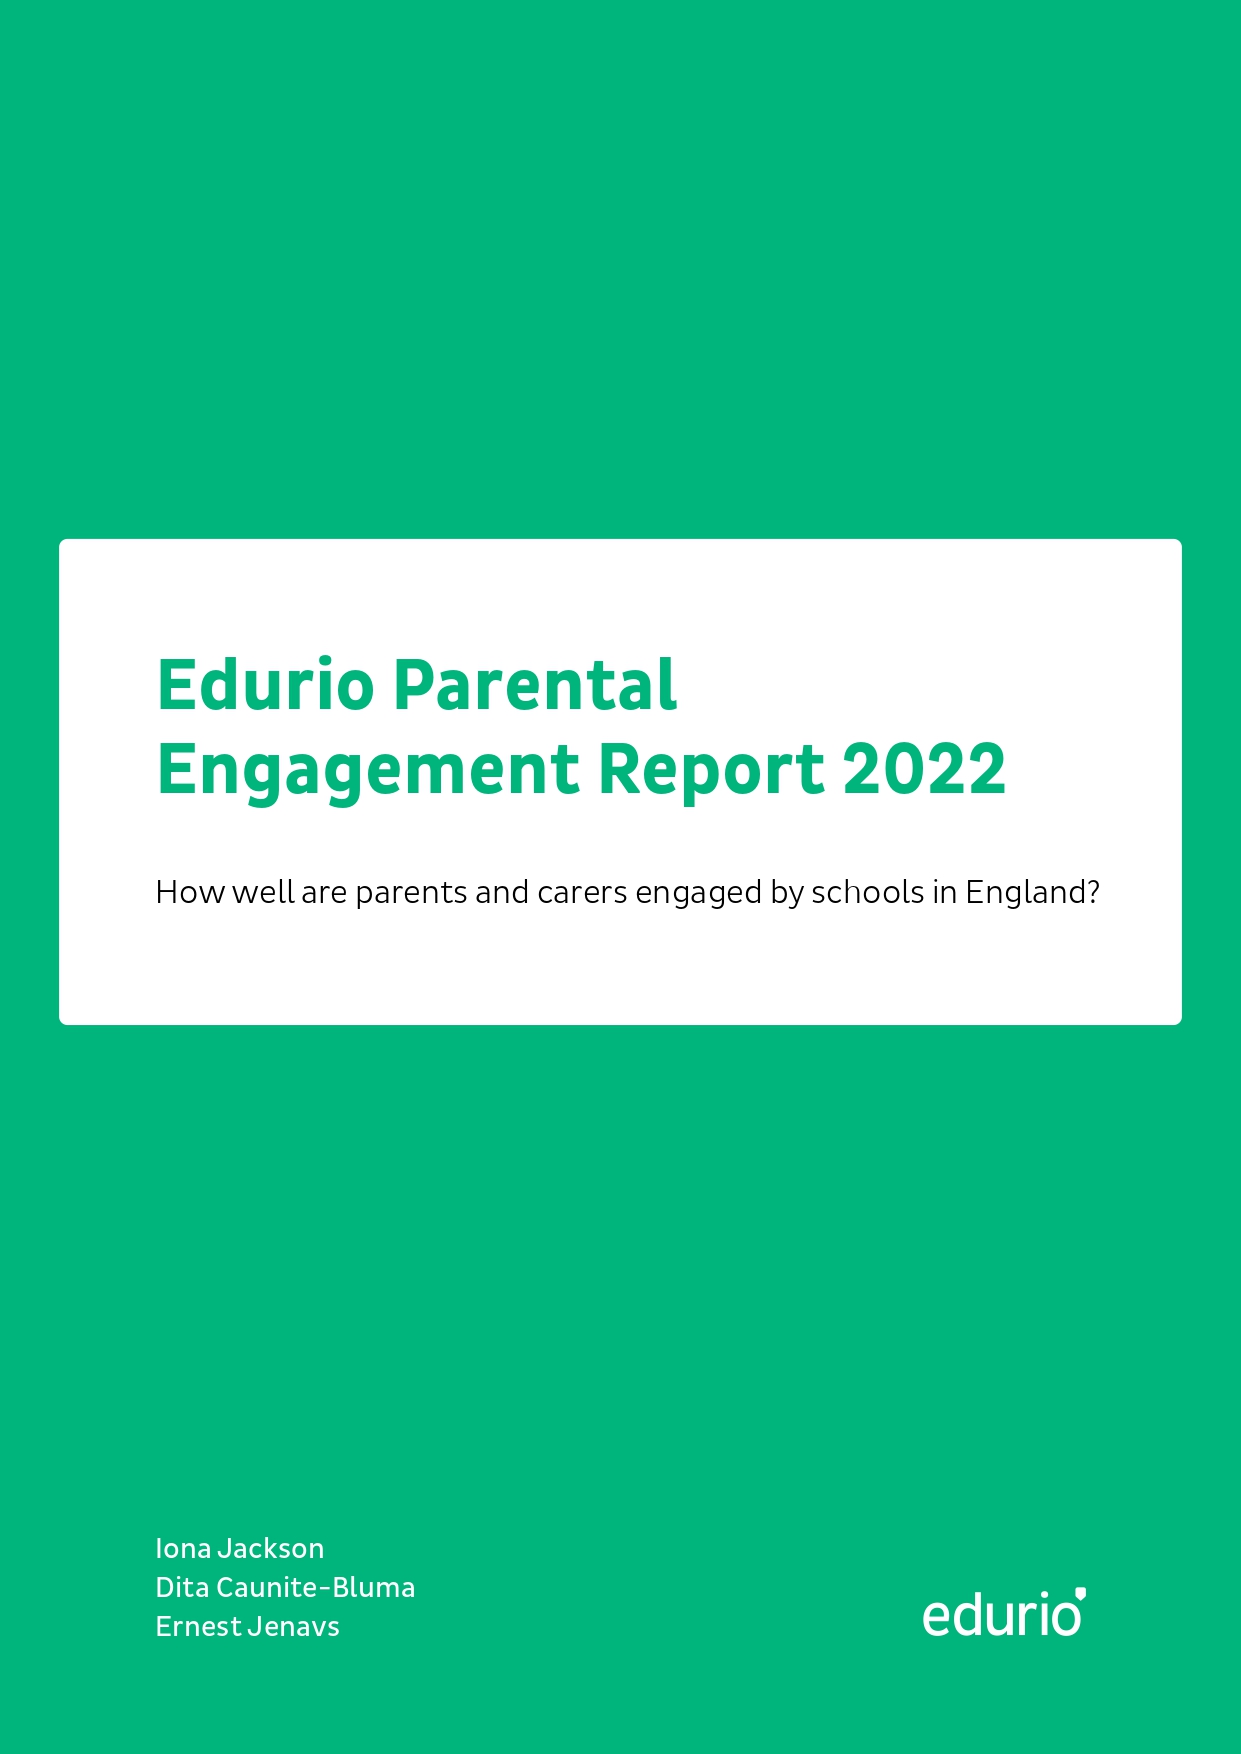 IMAGE
In this image, there is a screenshot of one of our report's front page. The page is green with a white box with a green title inside saying "Edurio Parental Engagement Report 2022". The undertitle is "How well are parents and carers engaged by schools in England?"